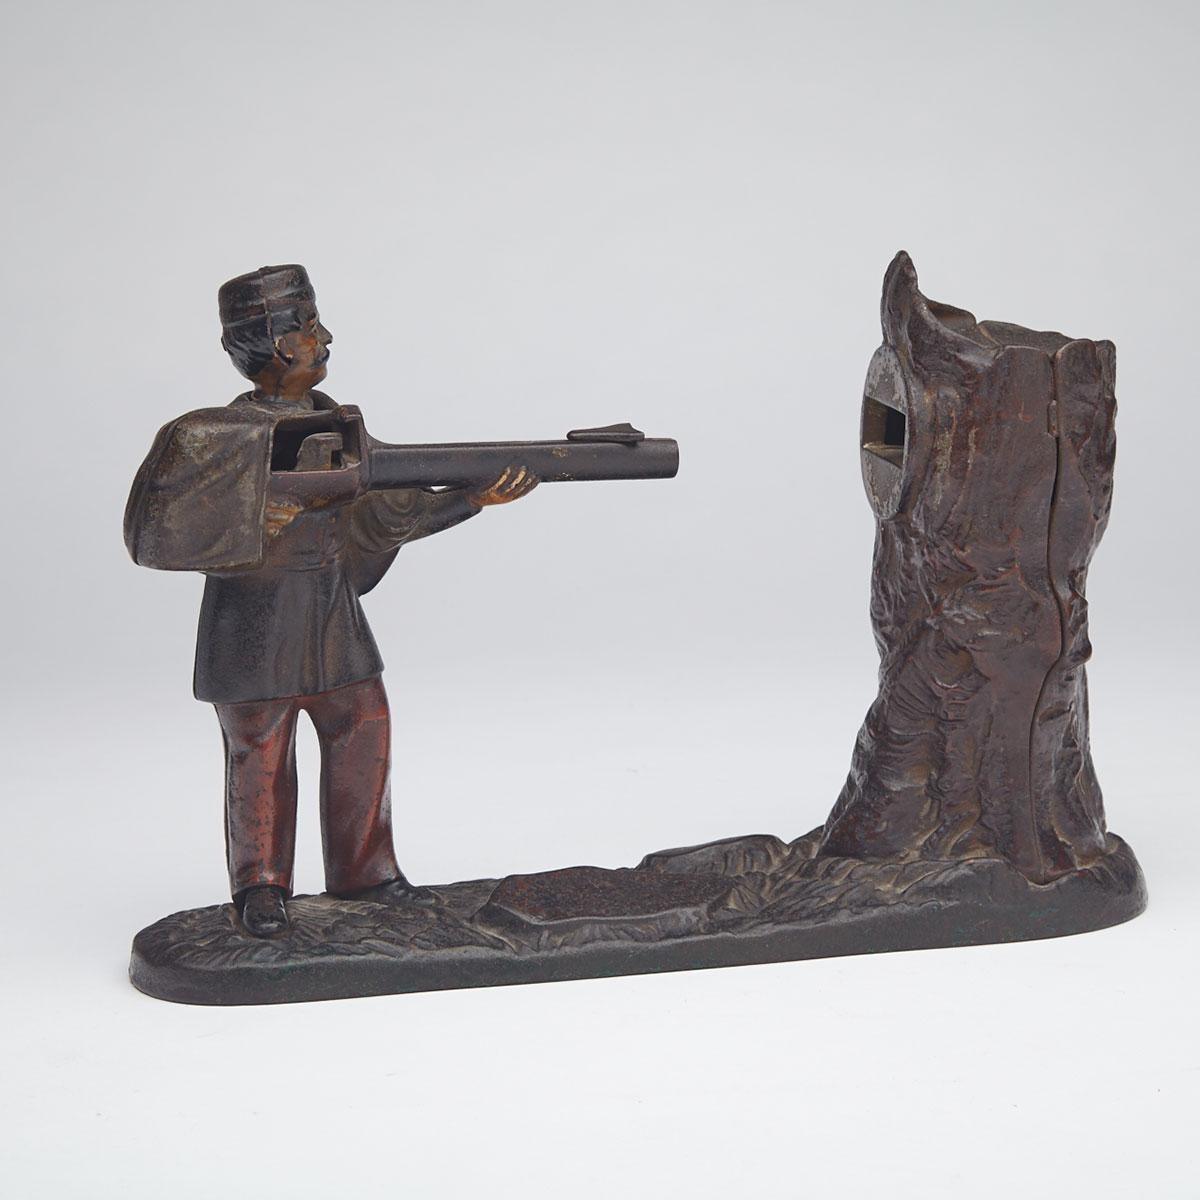 J. & E. Stevens ‘Creedmoor’ Soldier and Treestump Painted Cast Iron Mechanical Bank, 19th century